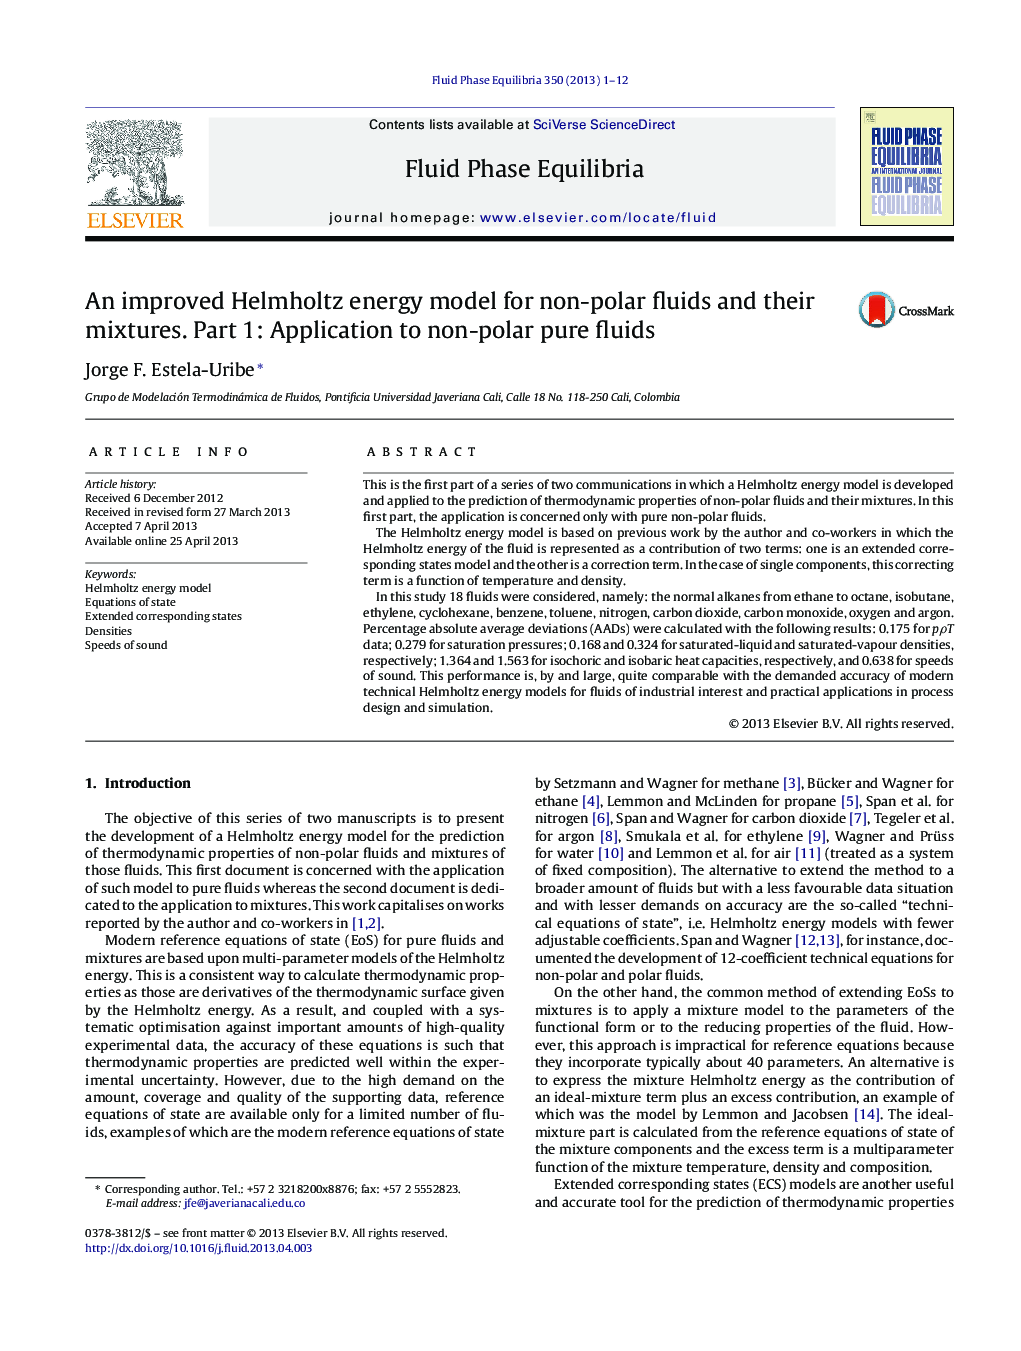 An improved Helmholtz energy model for non-polar fluids and their mixtures. Part 1: Application to non-polar pure fluids